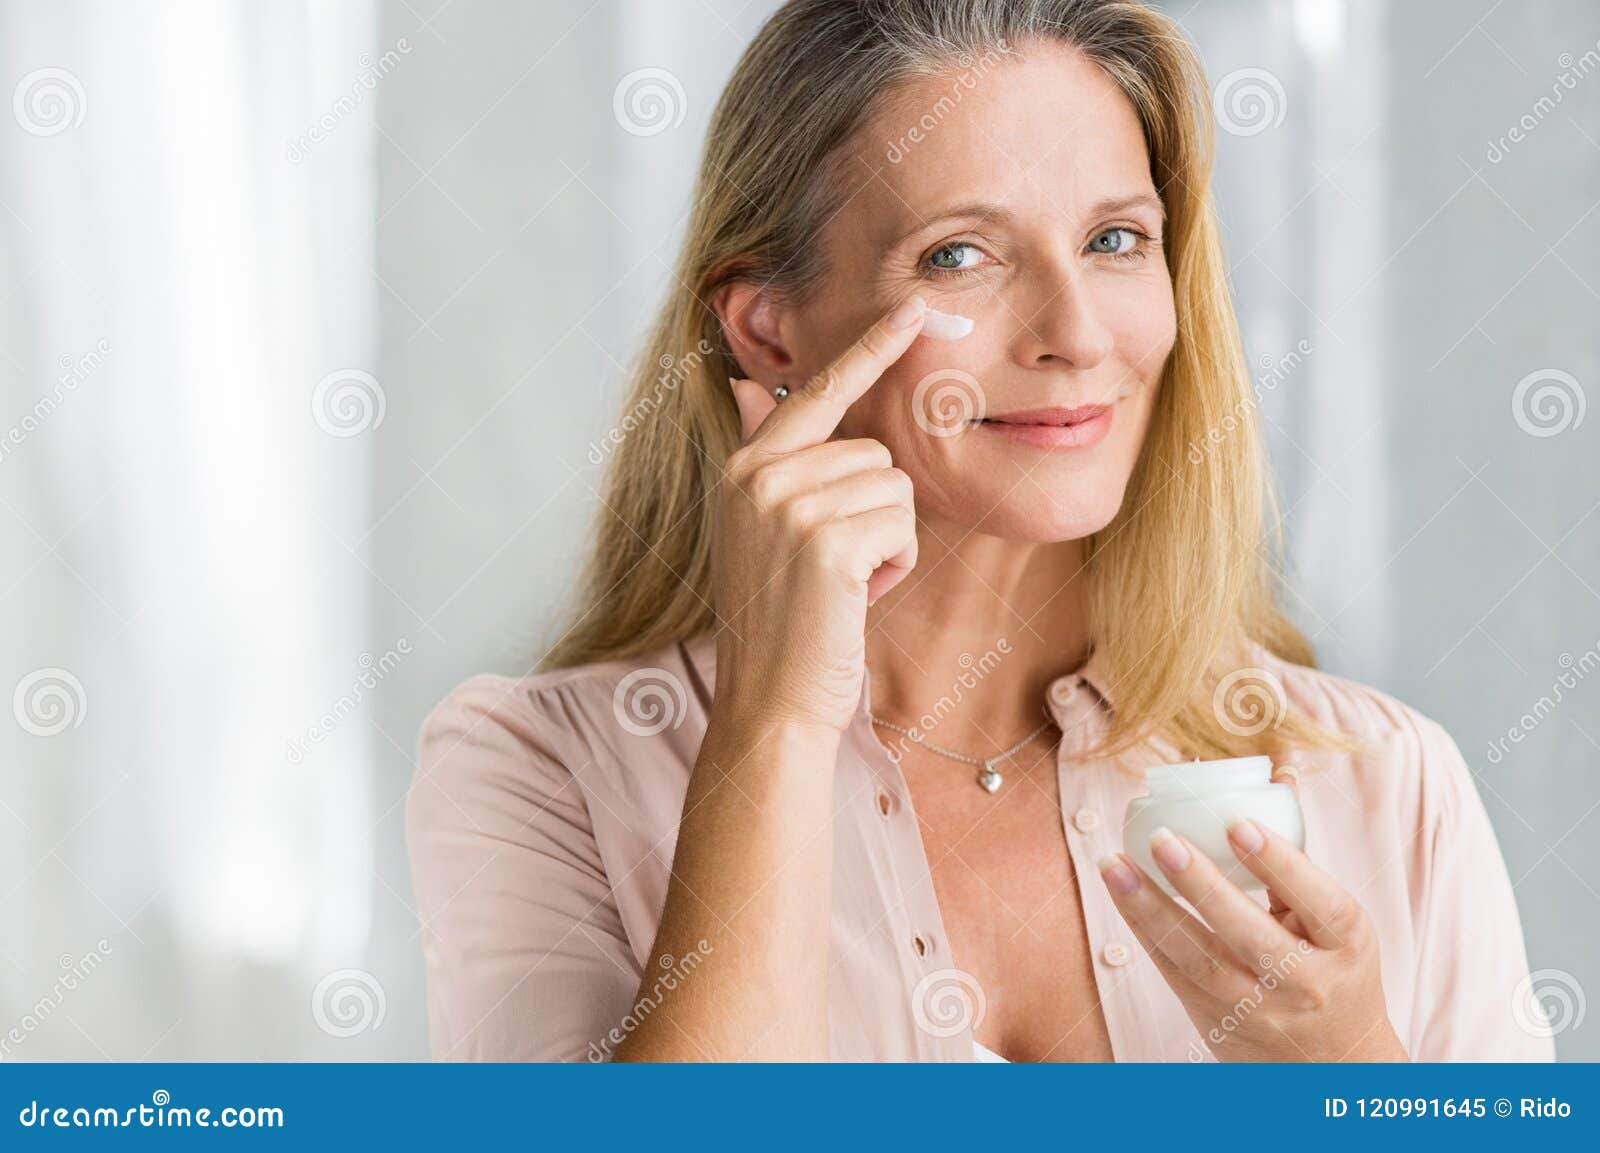 woman applying anti aging lotion on face